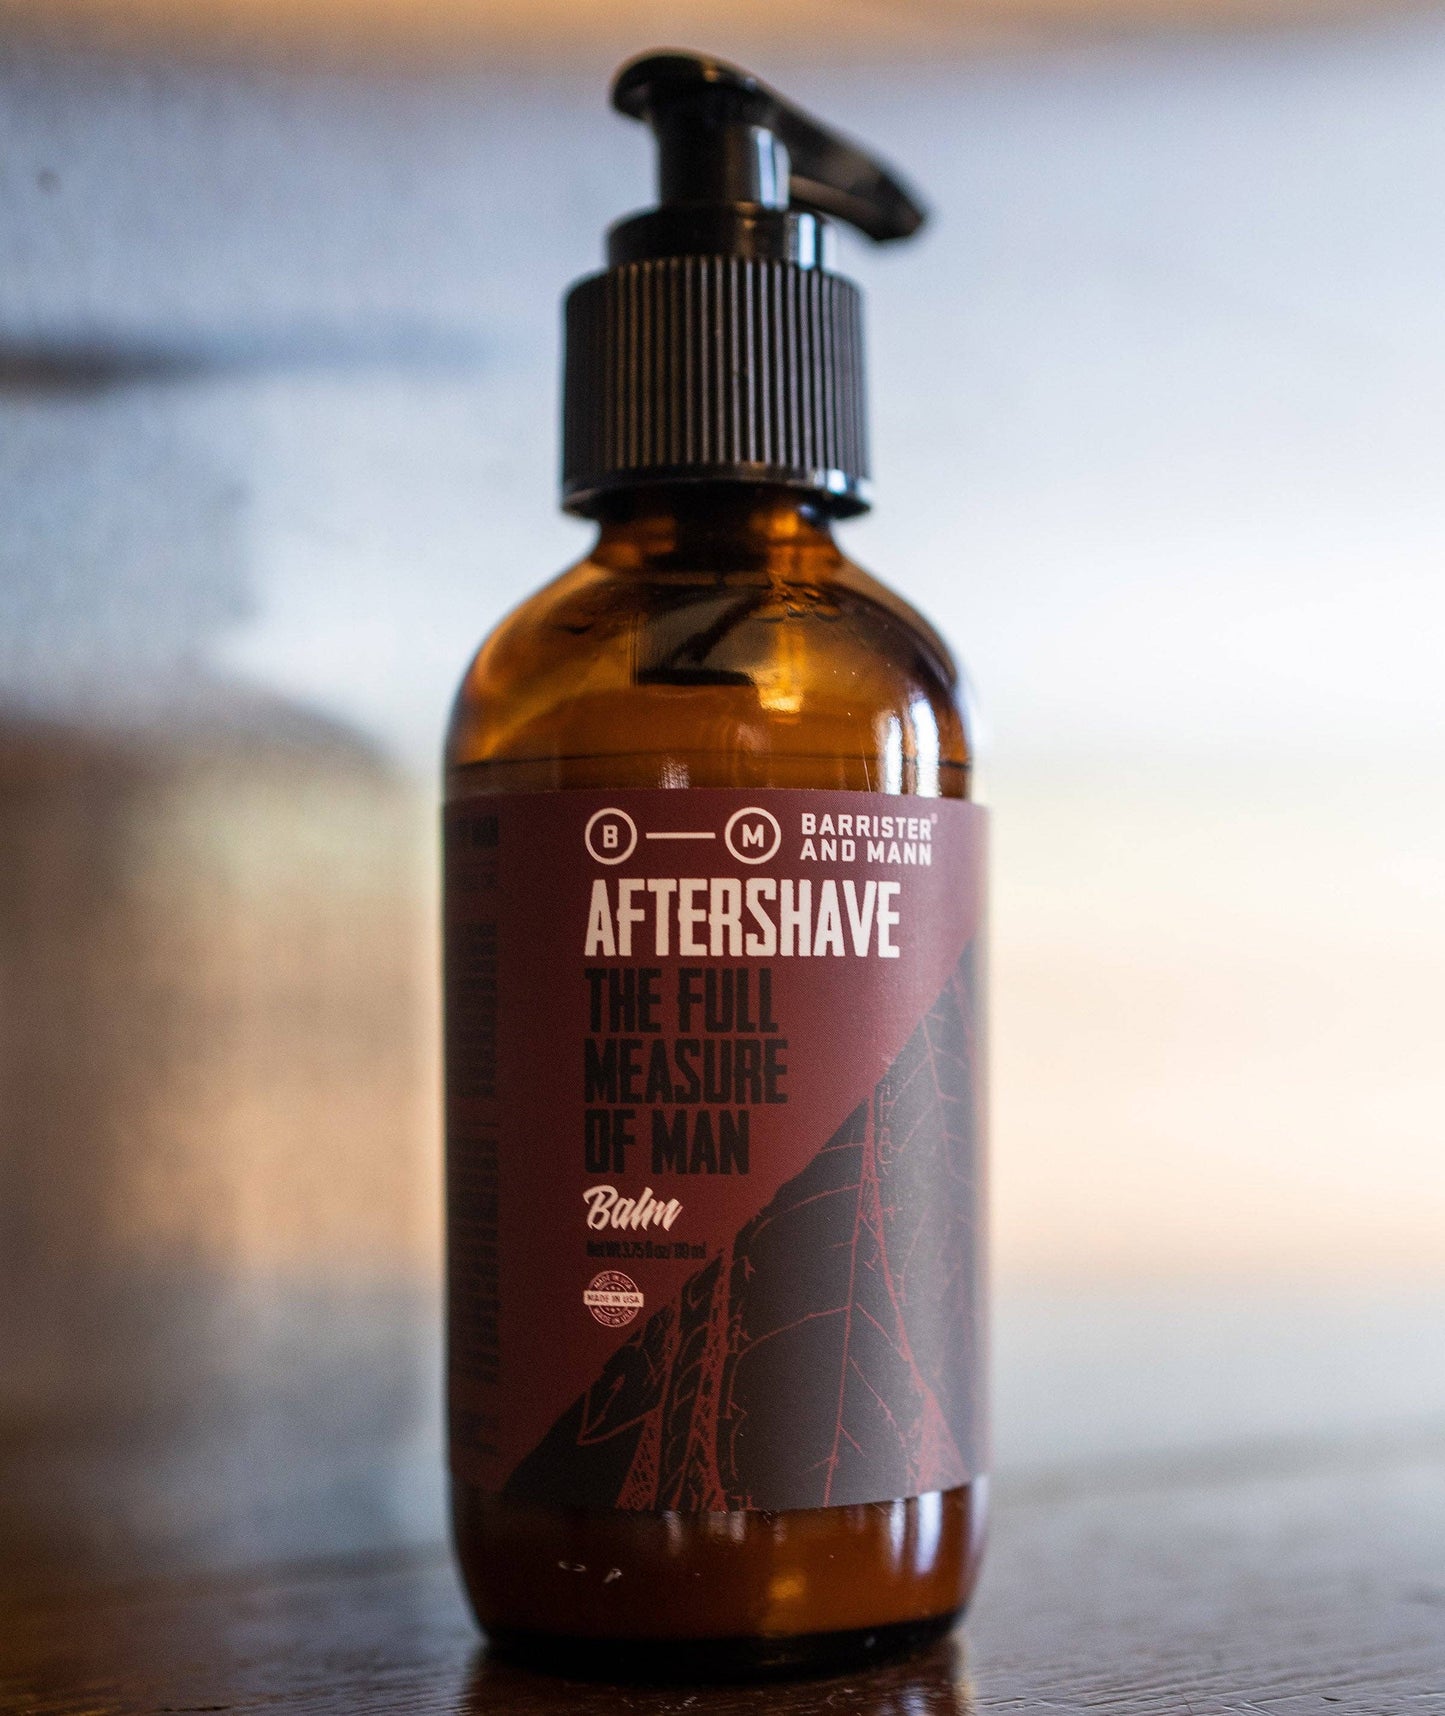 The Full Measure of Man Aftershave Balm